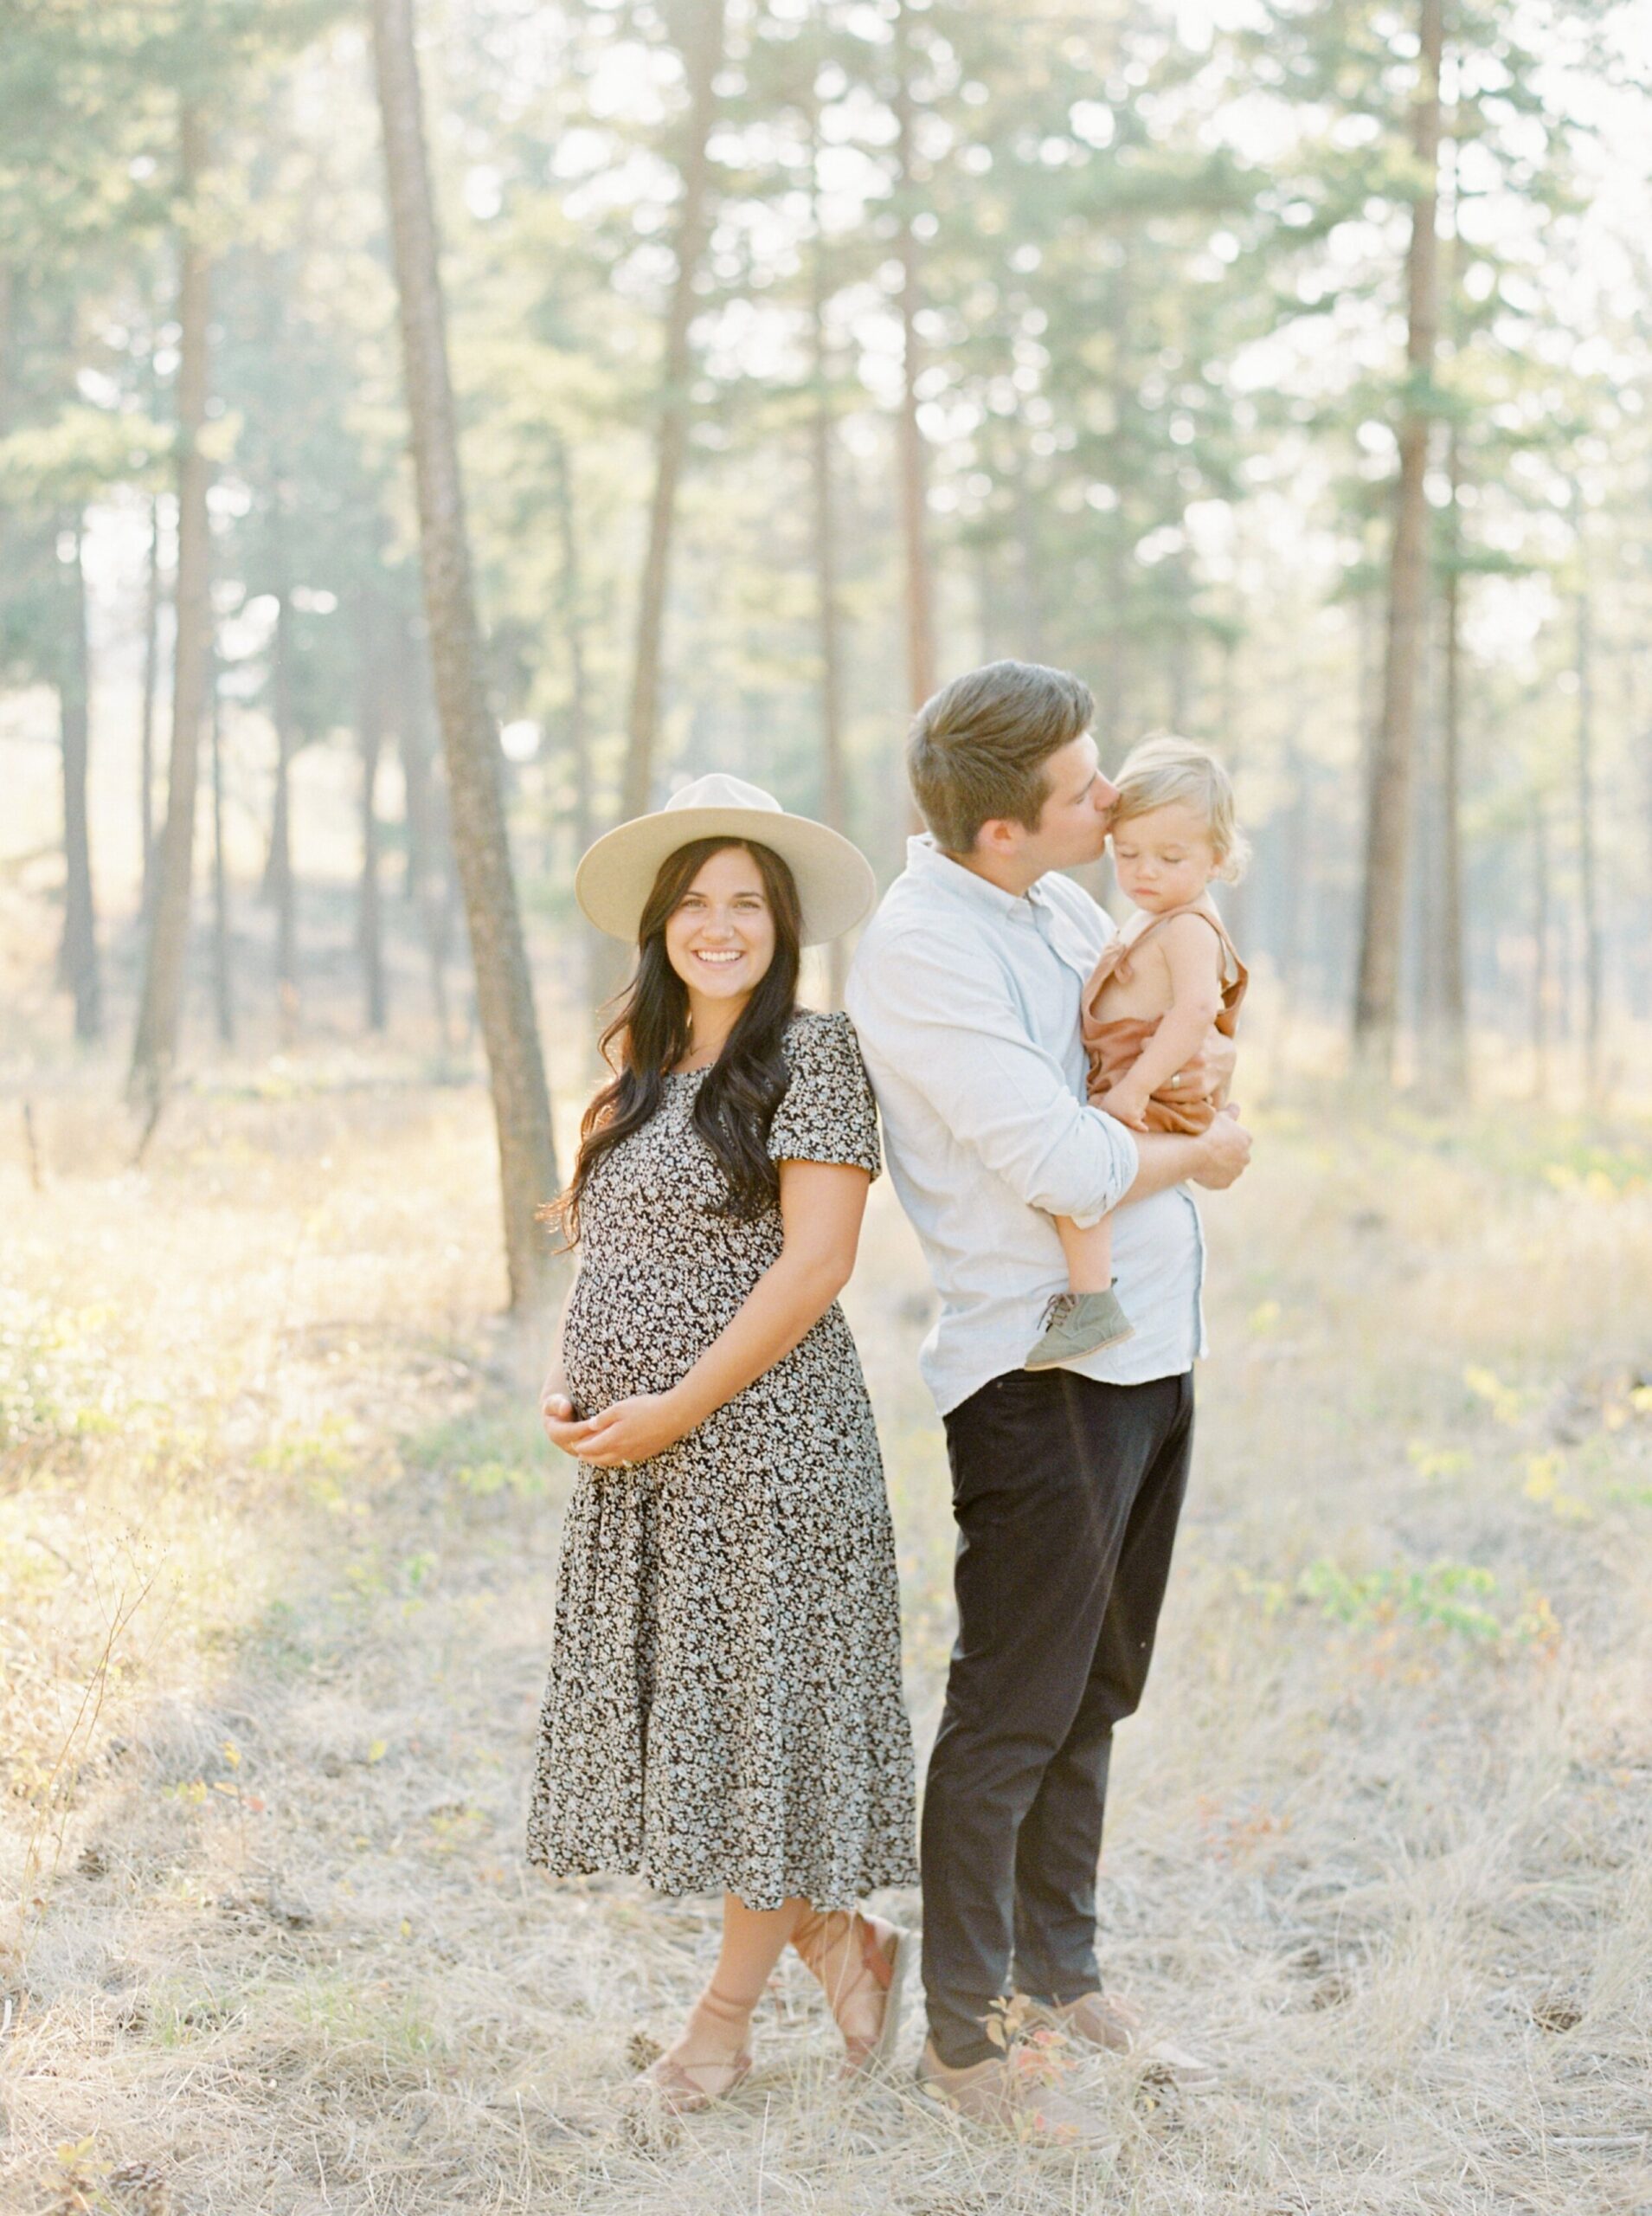  maternity session pose ideas | outfit suggestions for photo shoots | maternity family session | Calgary maternity photographer | Justine milton 